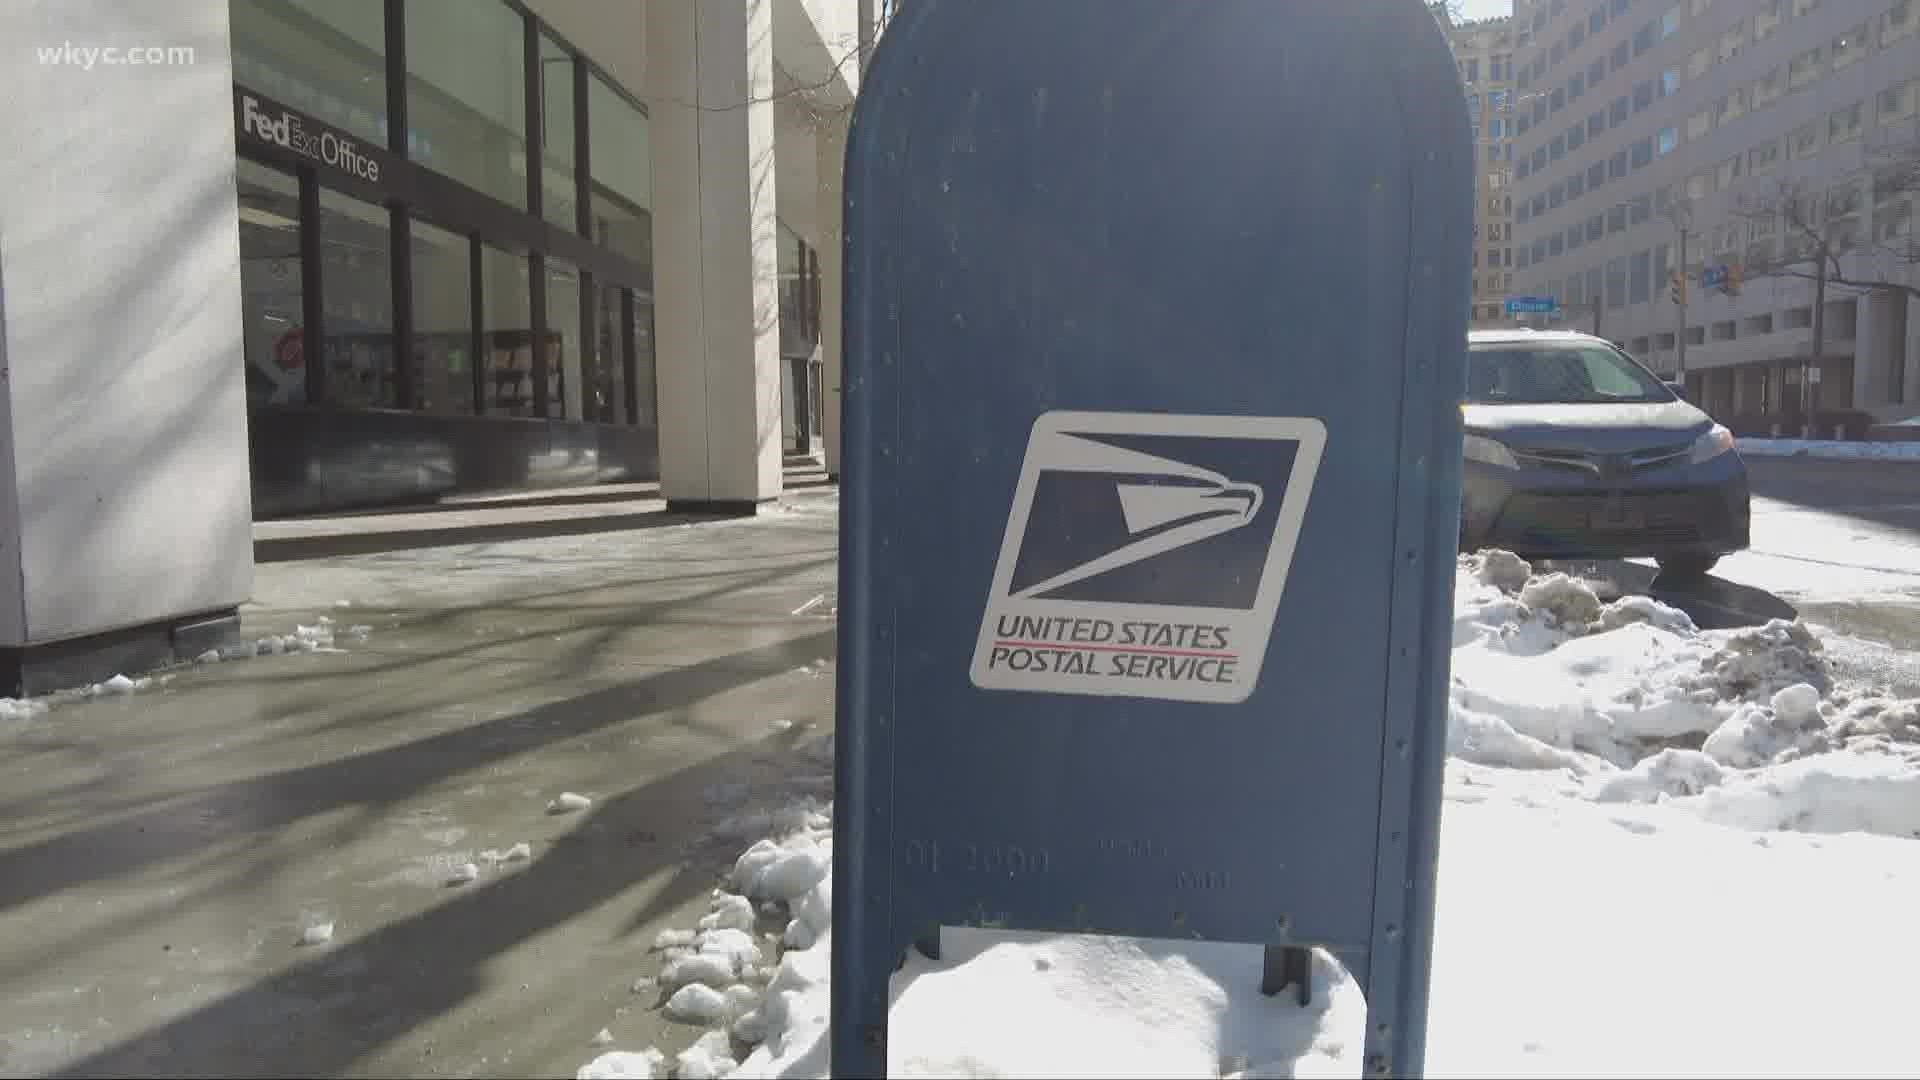 Today local officials and the postal service are urging residents to be cautious – Amani Abraham has more.